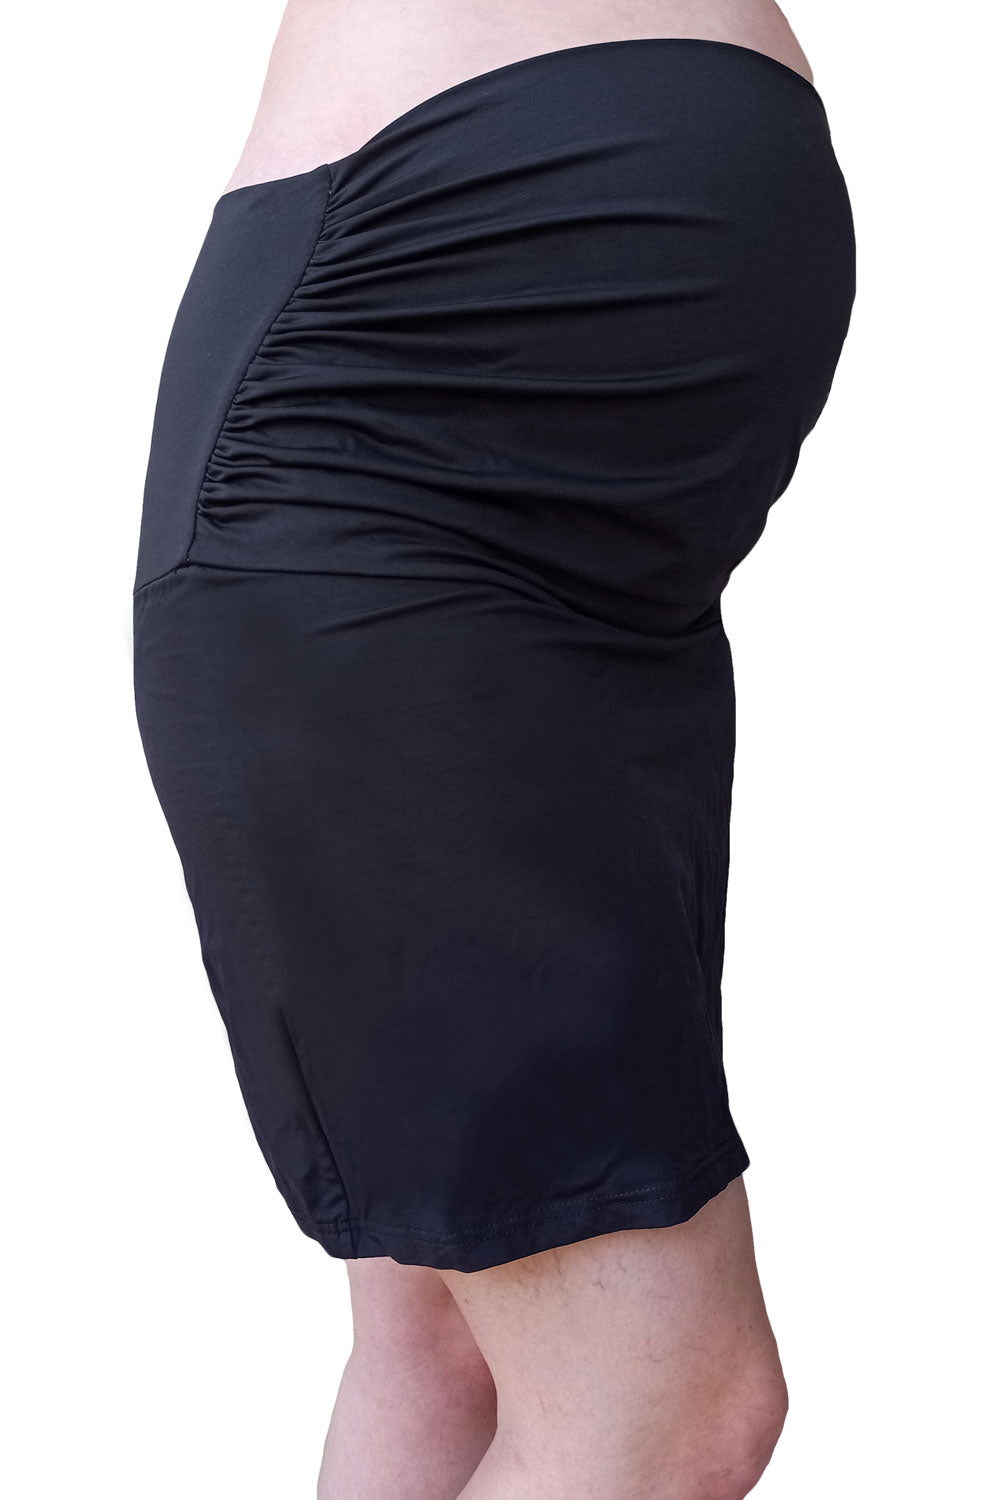 Fold Over Panel Maternity Swim Skirt With Attached Brief - Black - Mermaid  Maternity